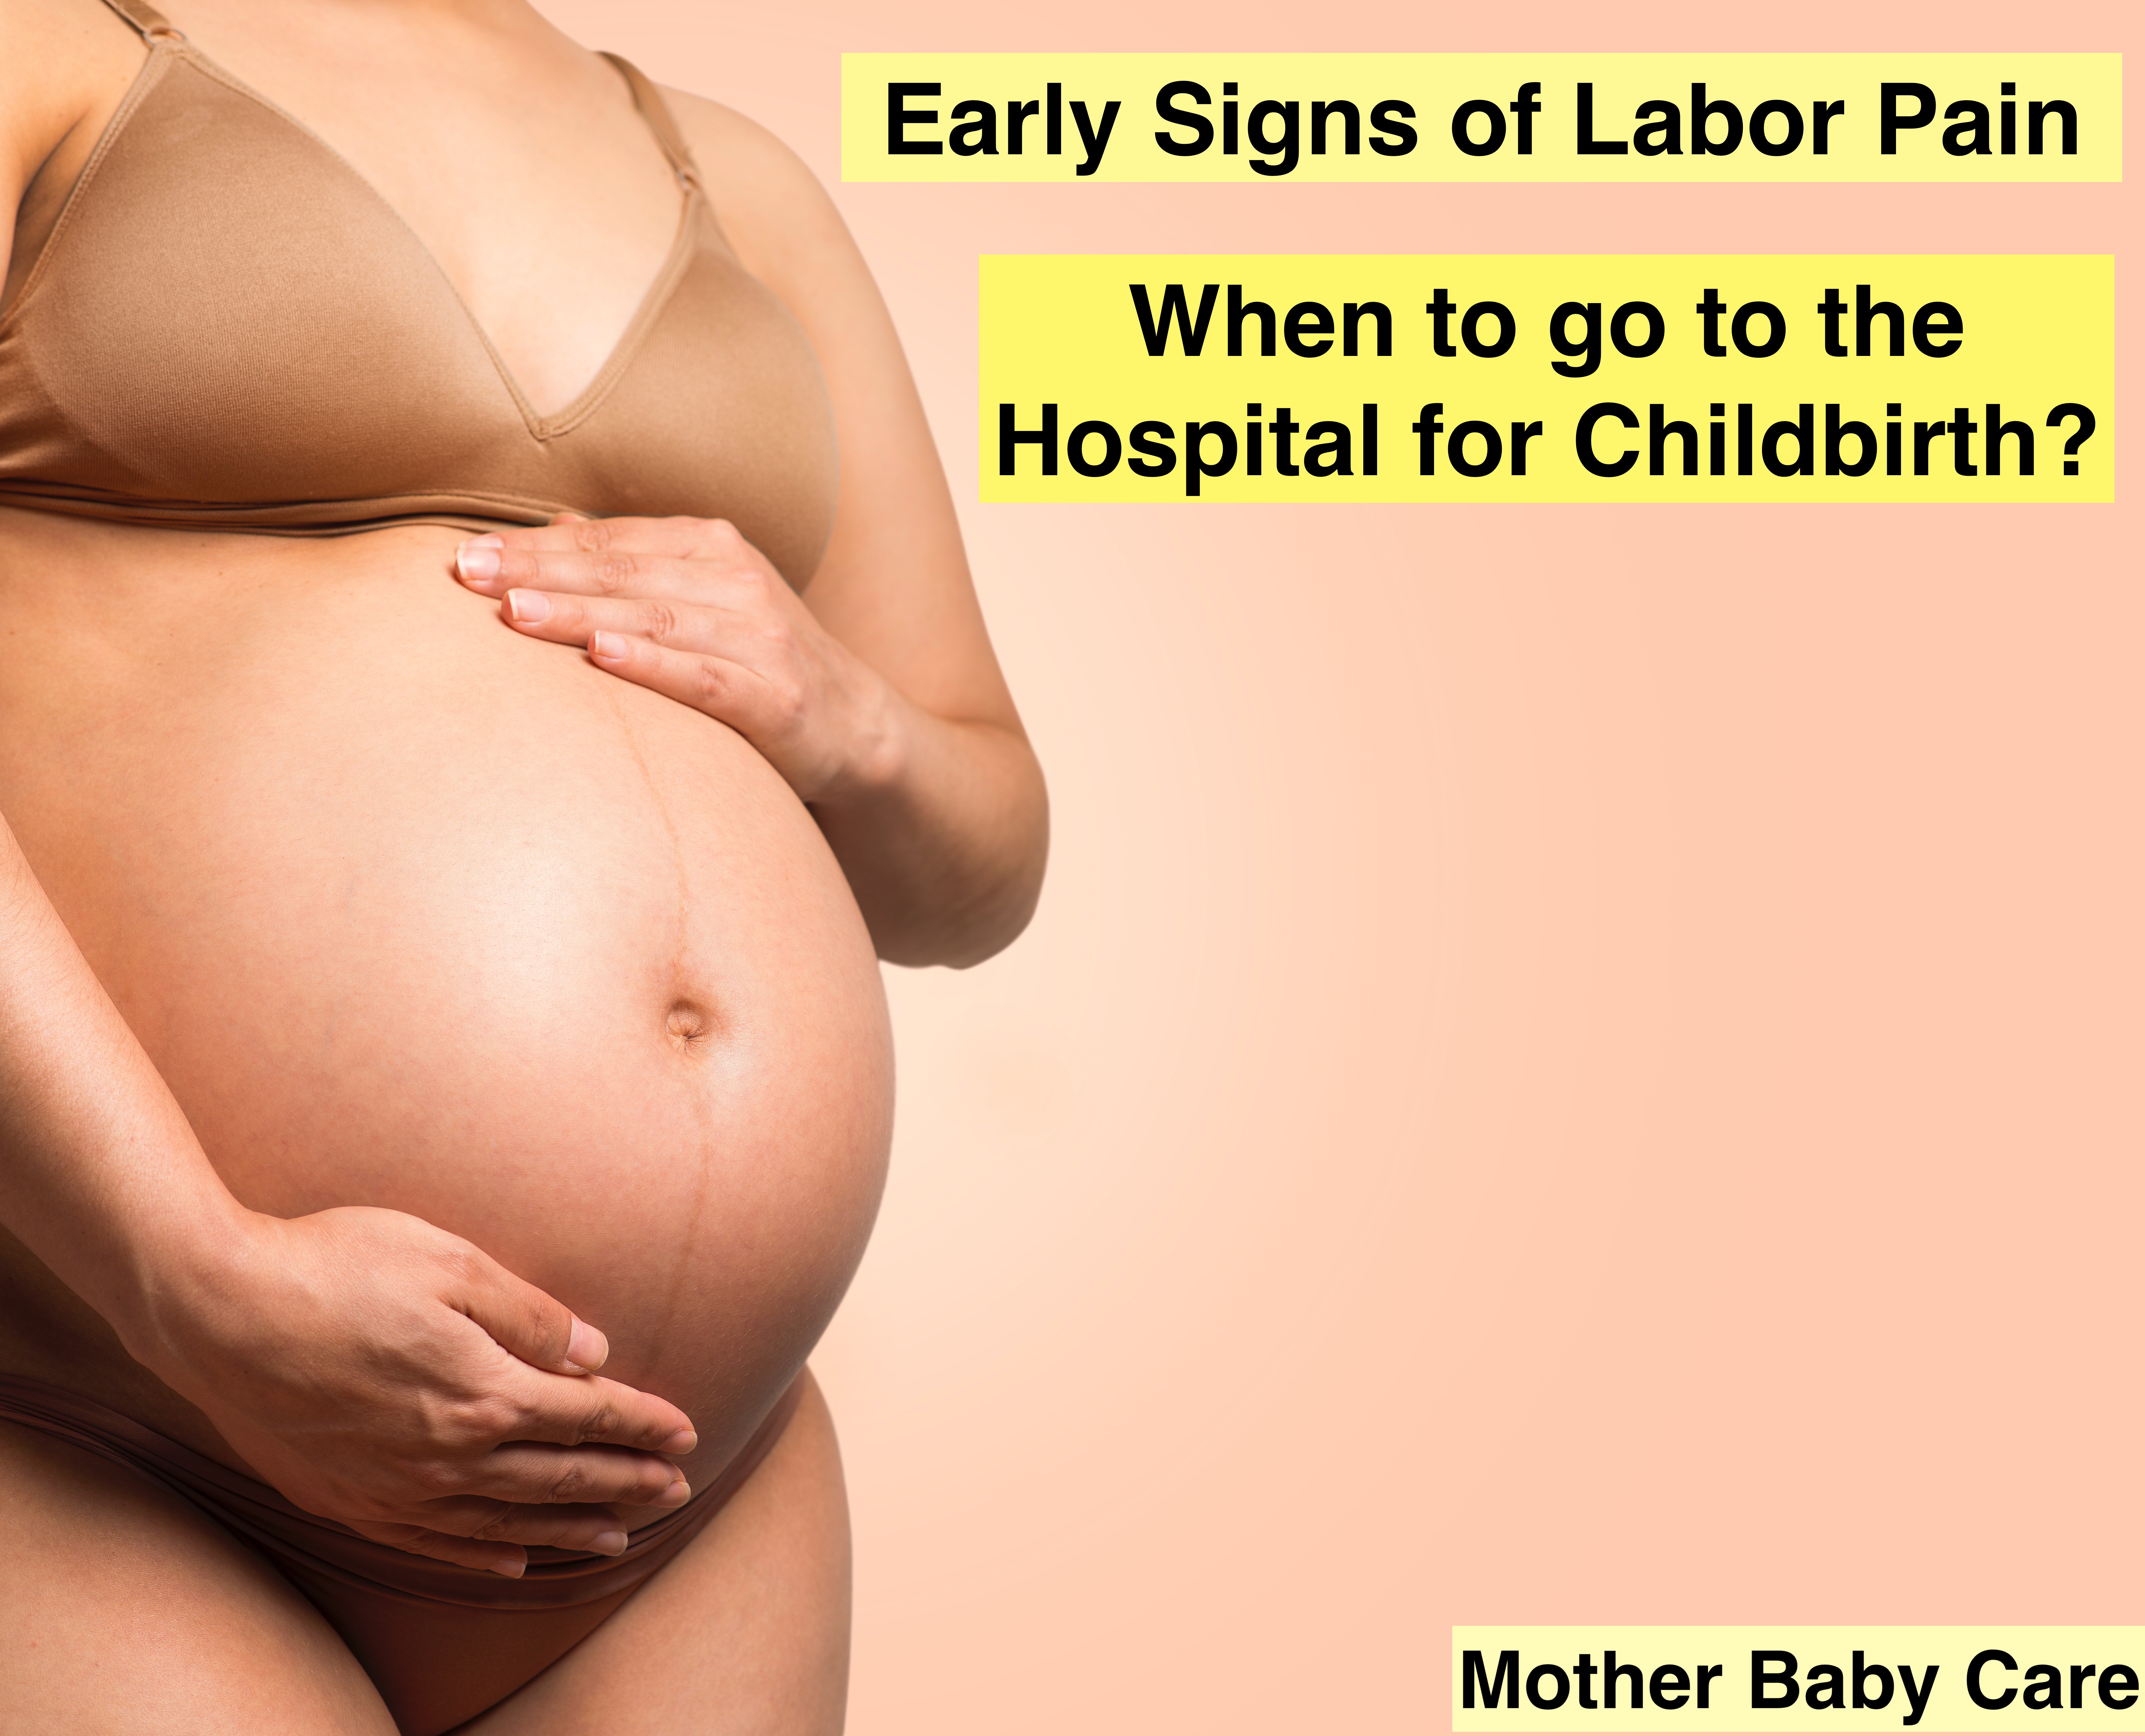 When to go to the Hospital for Childbirth